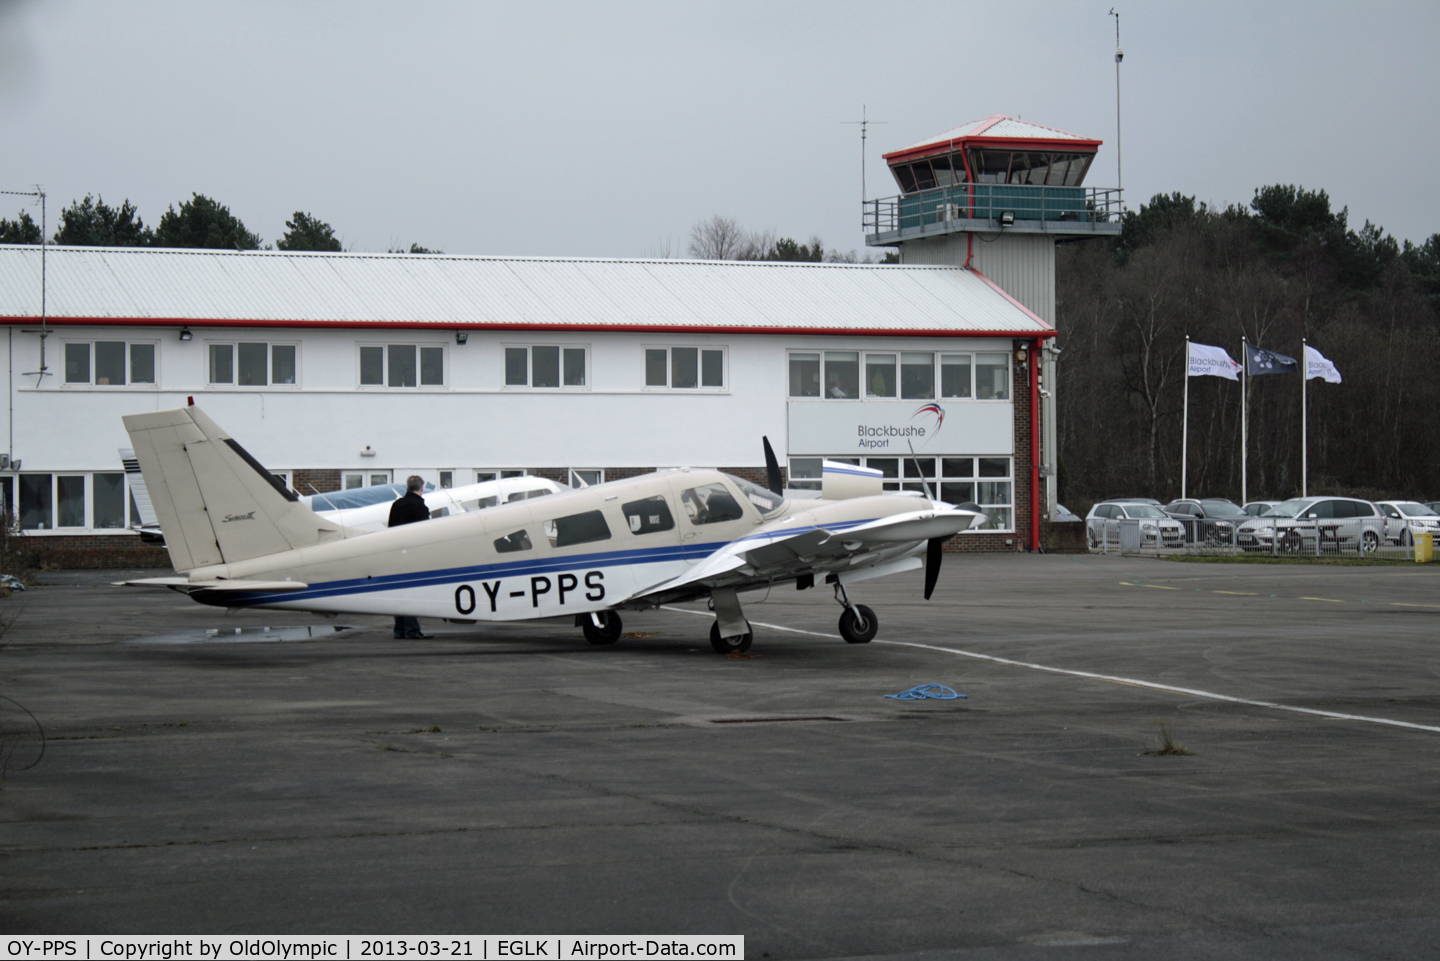 OY-PPS, 1987 Piper PA-34-220T Seneca III C/N 34-33021, Visiting from Finland